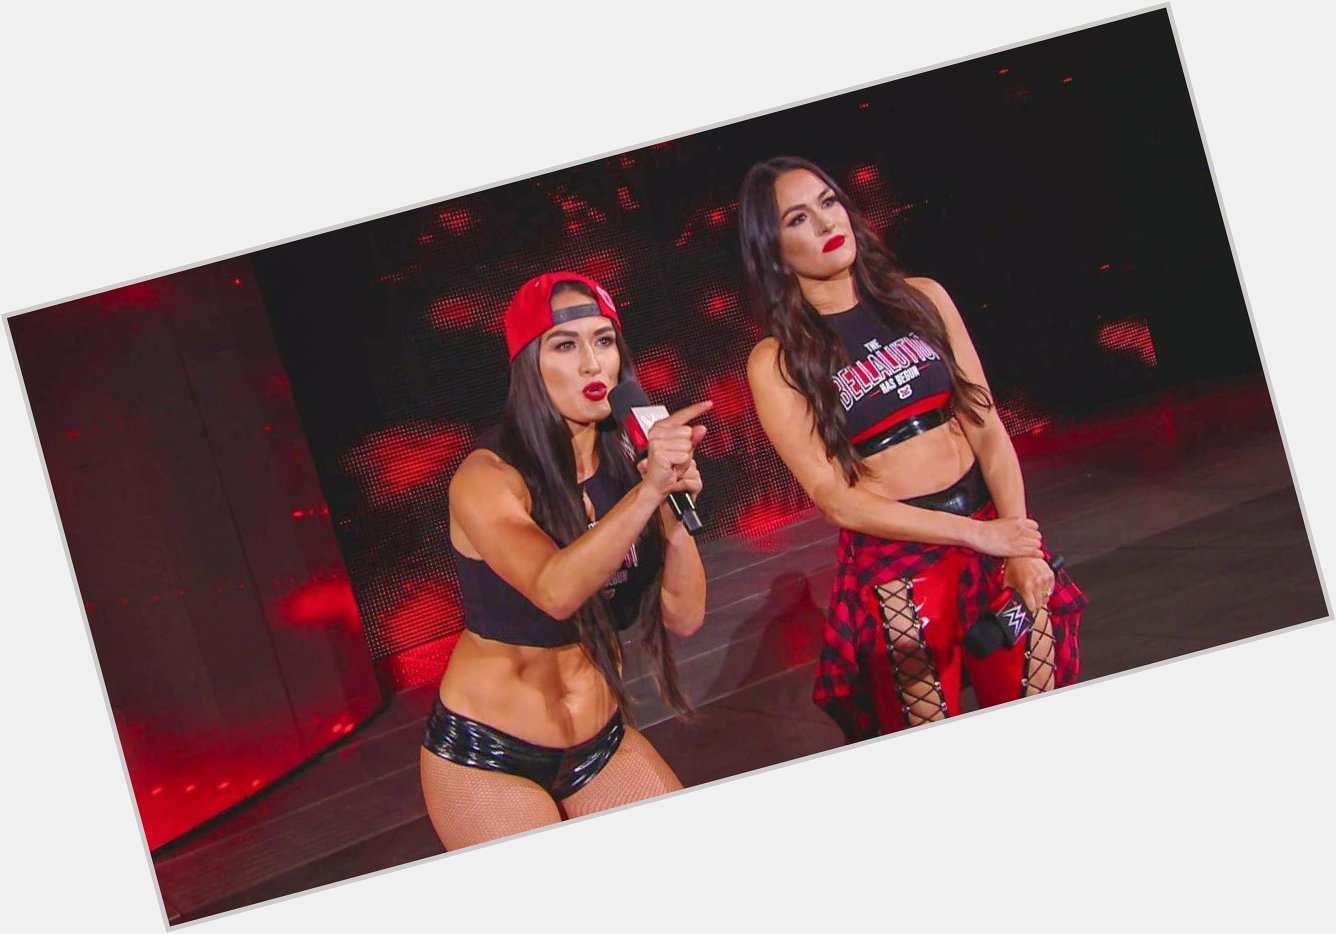 HAPPY 39TH BIRTHDAY TO THE BELLA TWINS     